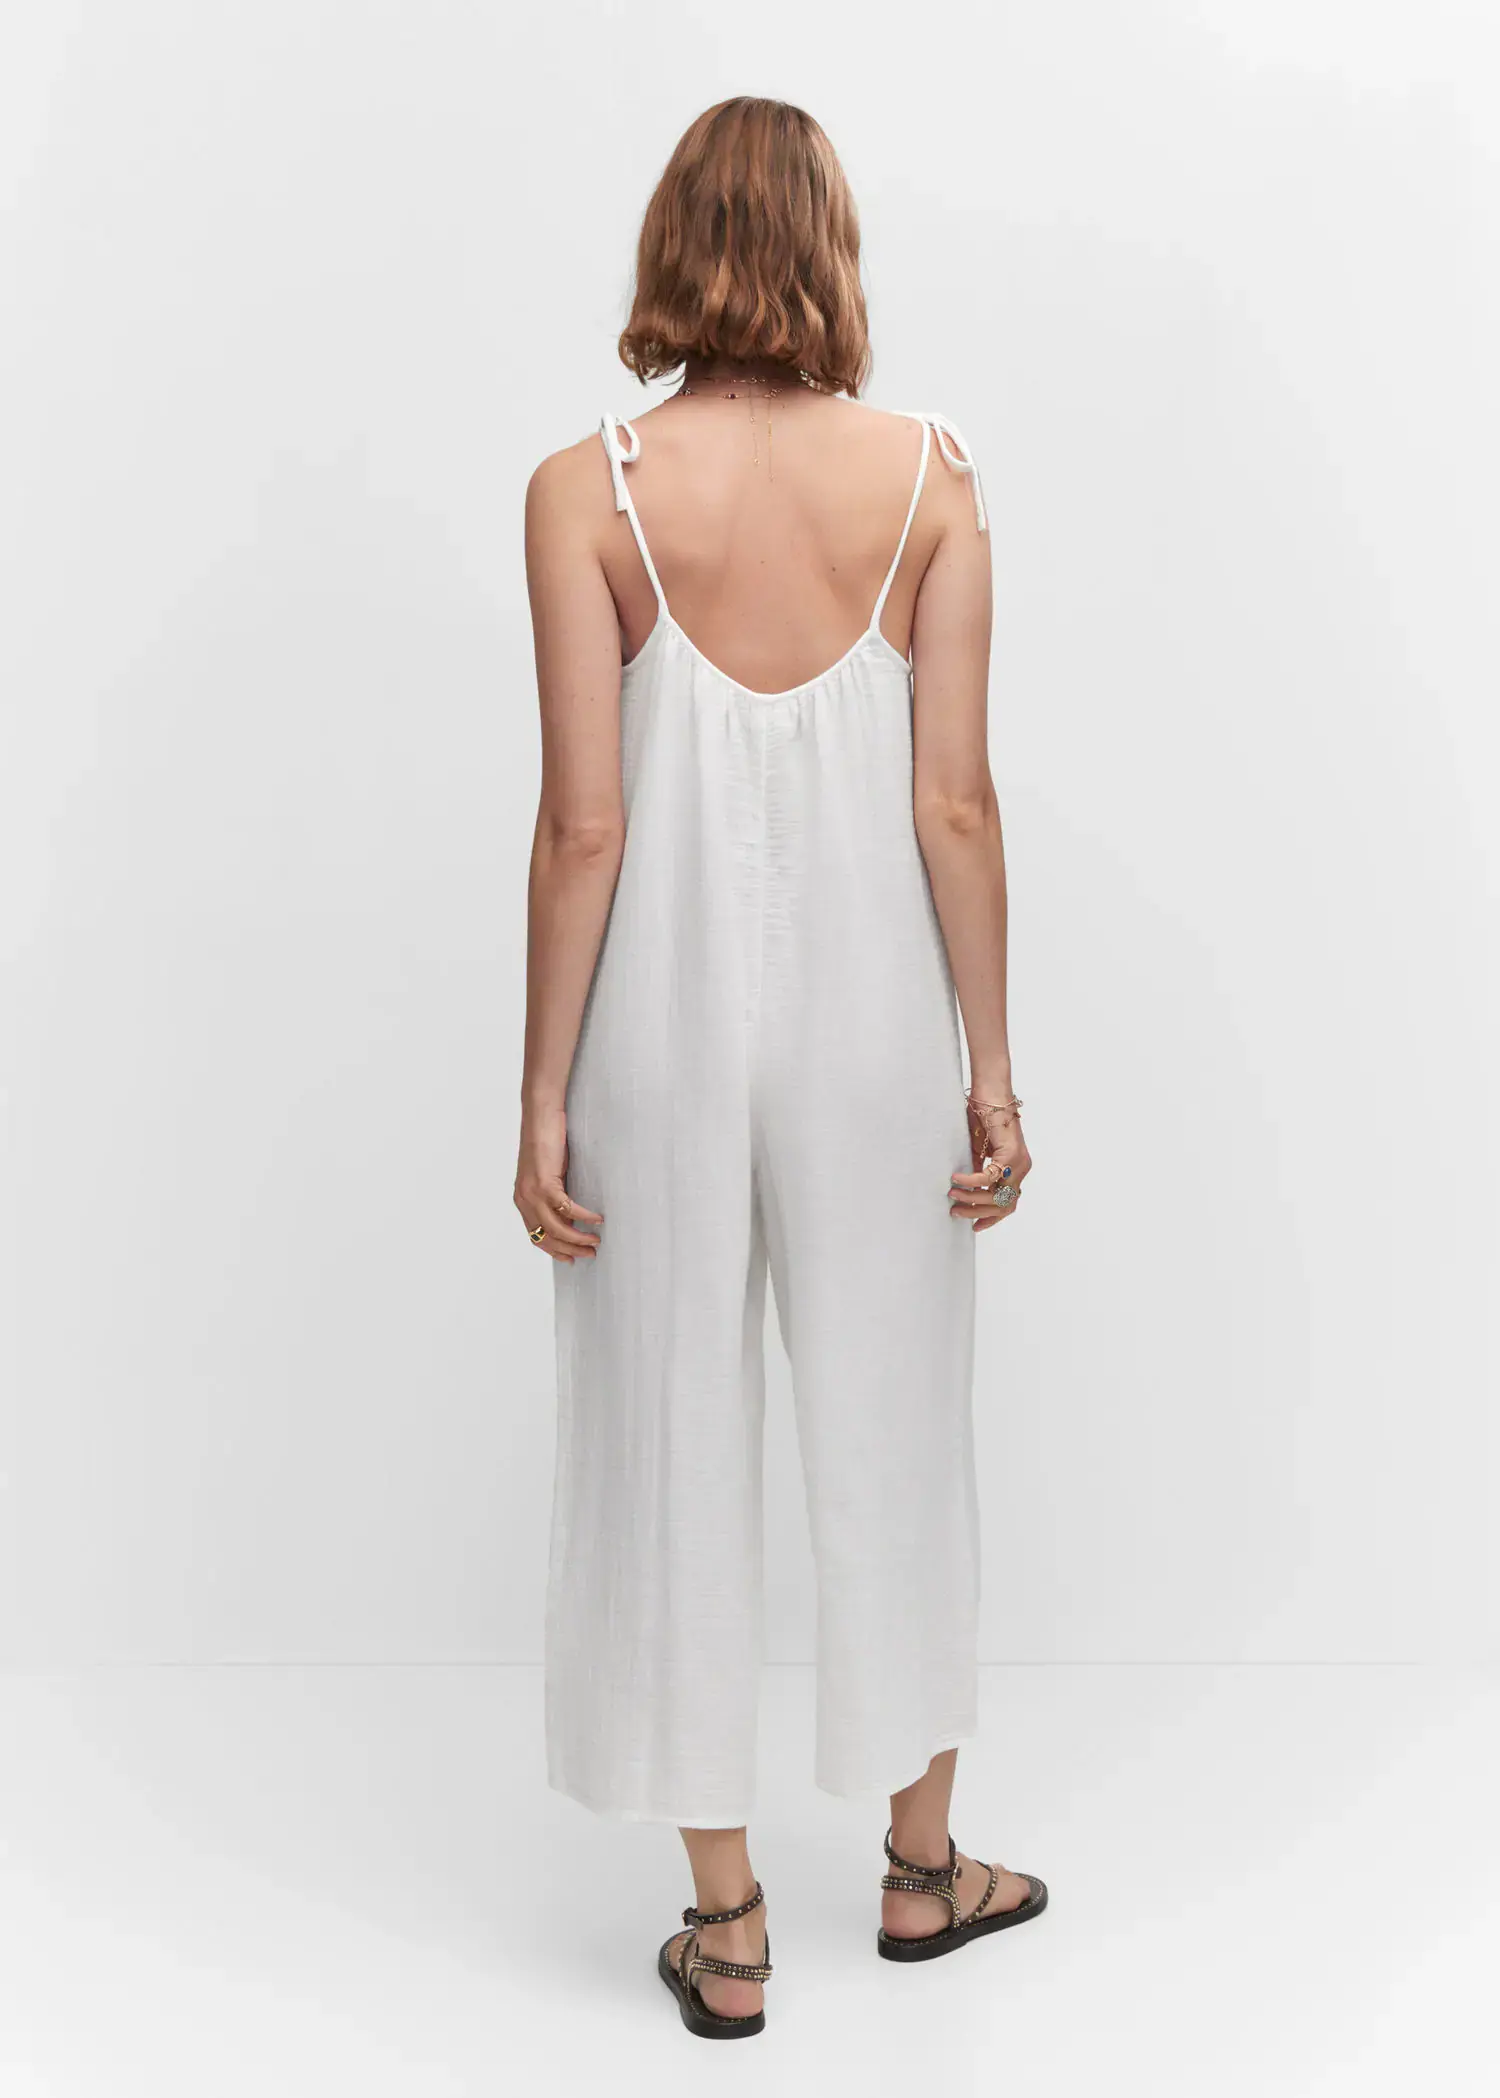 Mango Textured jumpsuit with bows. a woman wearing a white dress standing next to a white wall. 